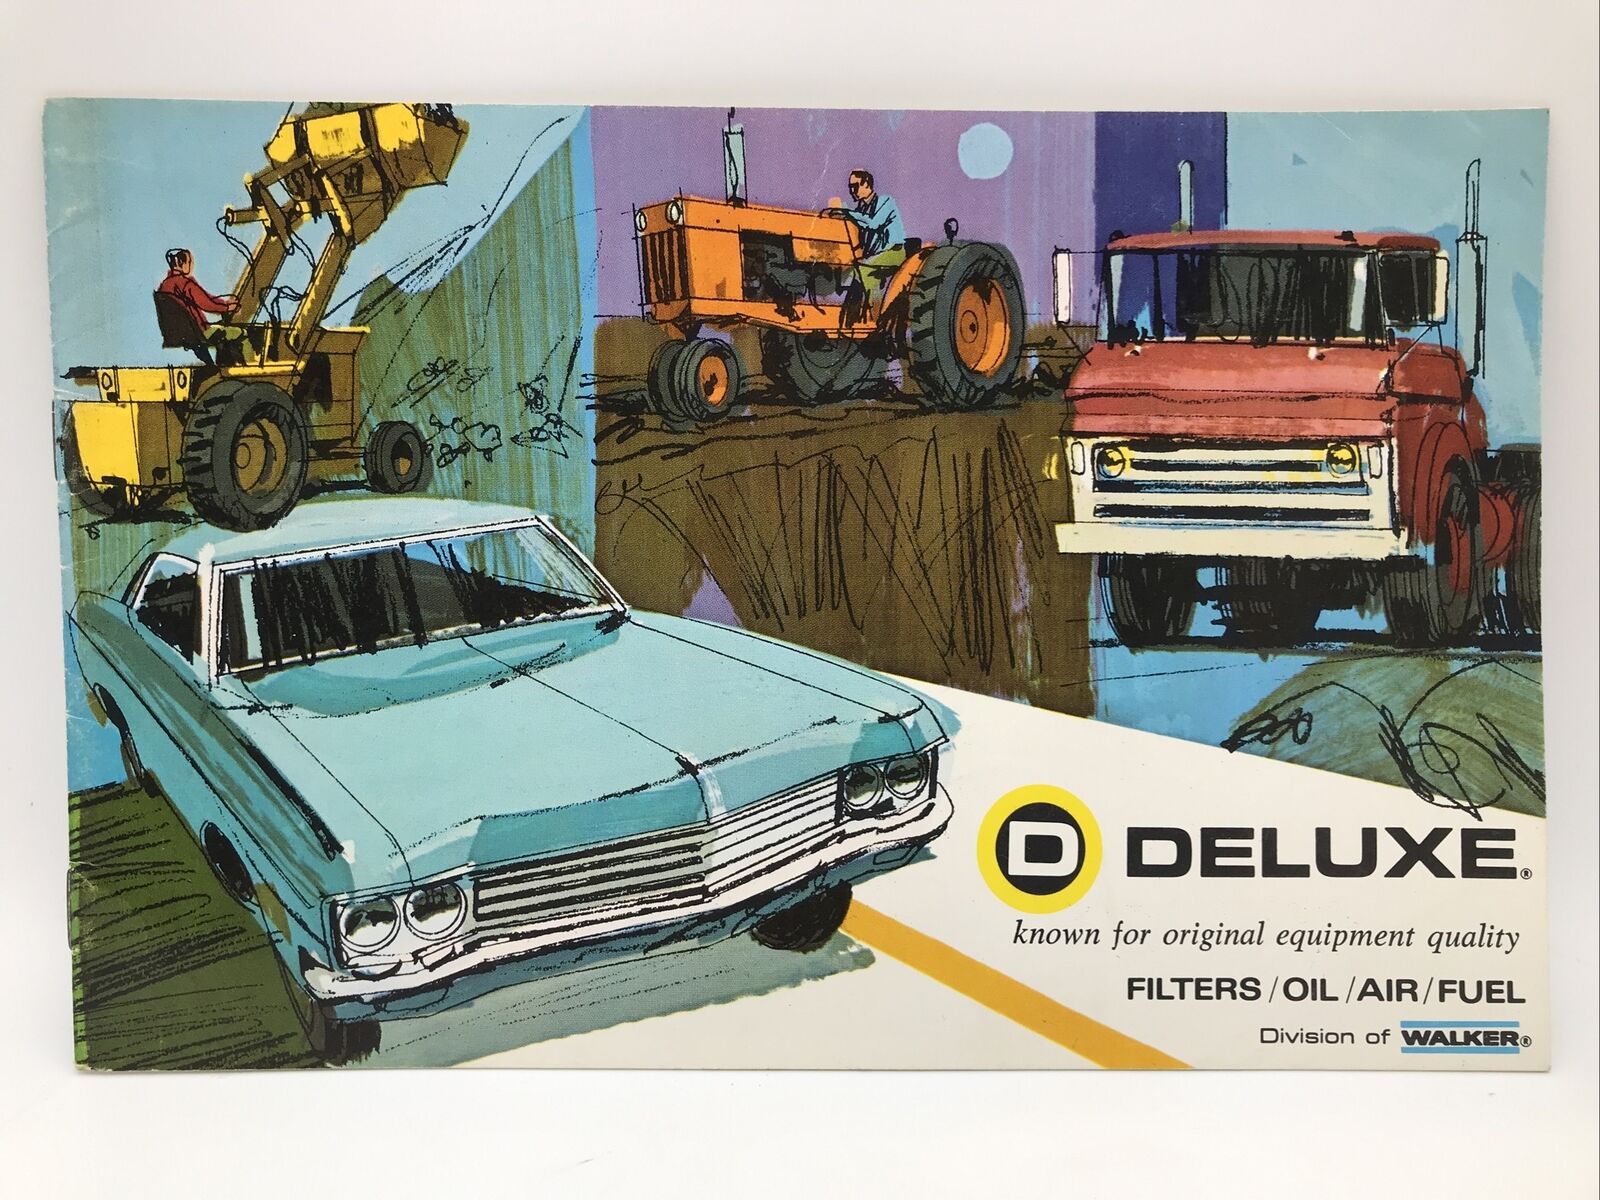 1970 Deluxe Filters Oil Air Fuel Division Of Walker Sales Catalog Brochure